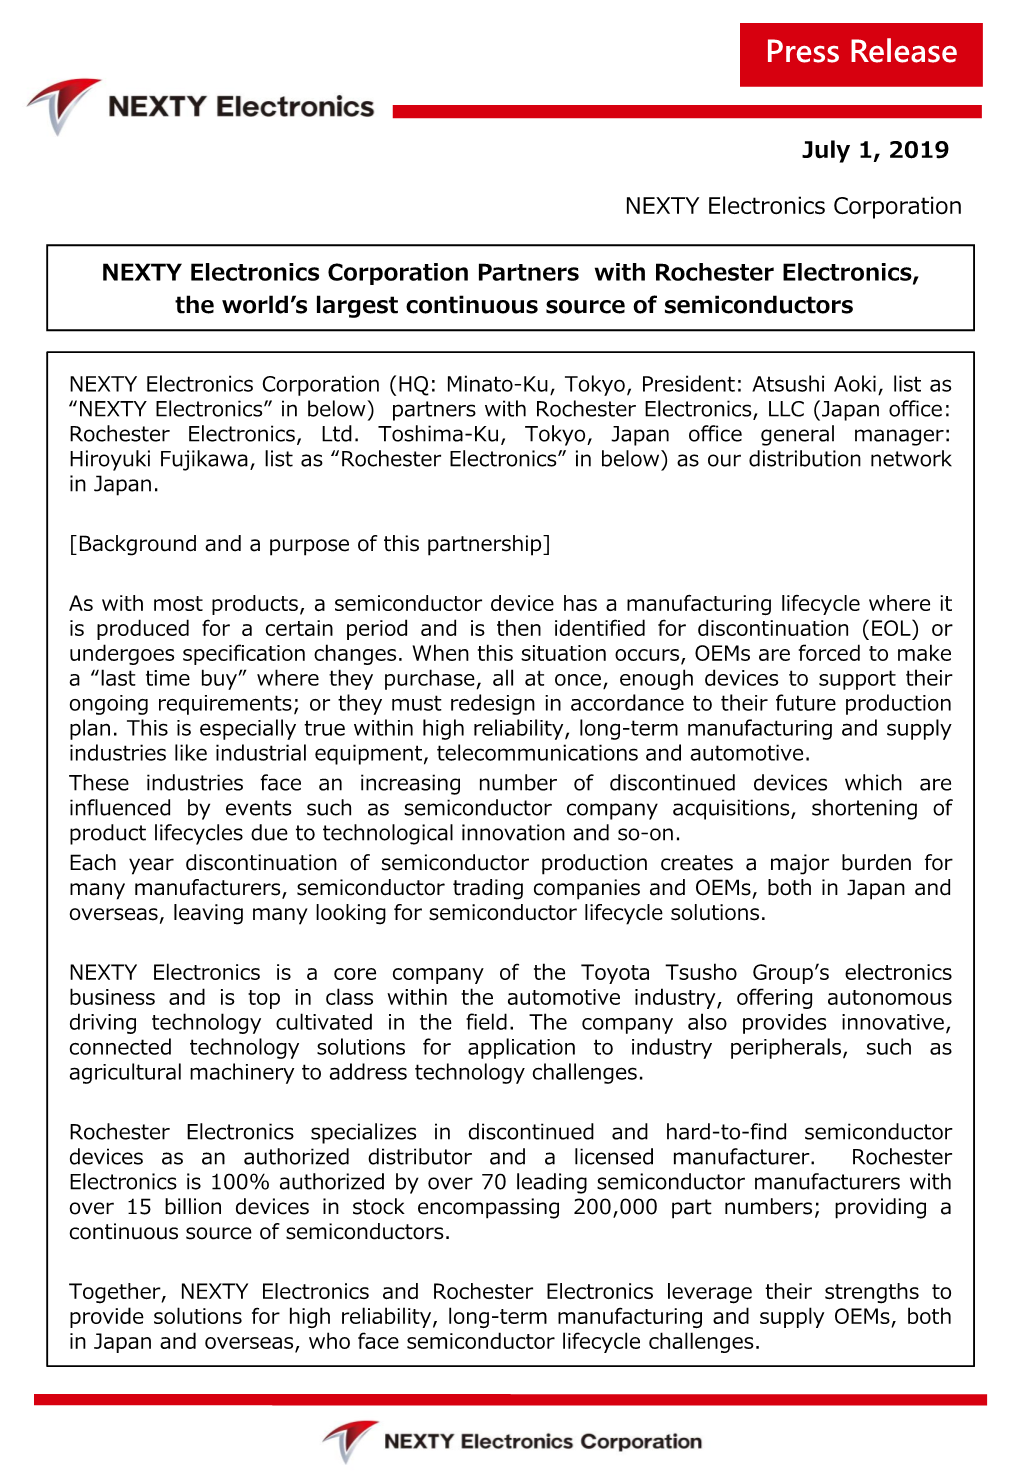 NEXTY Electronics Corporation Partners with Rochester Electronics, the World’S Largest Continuous Source of Semiconductors